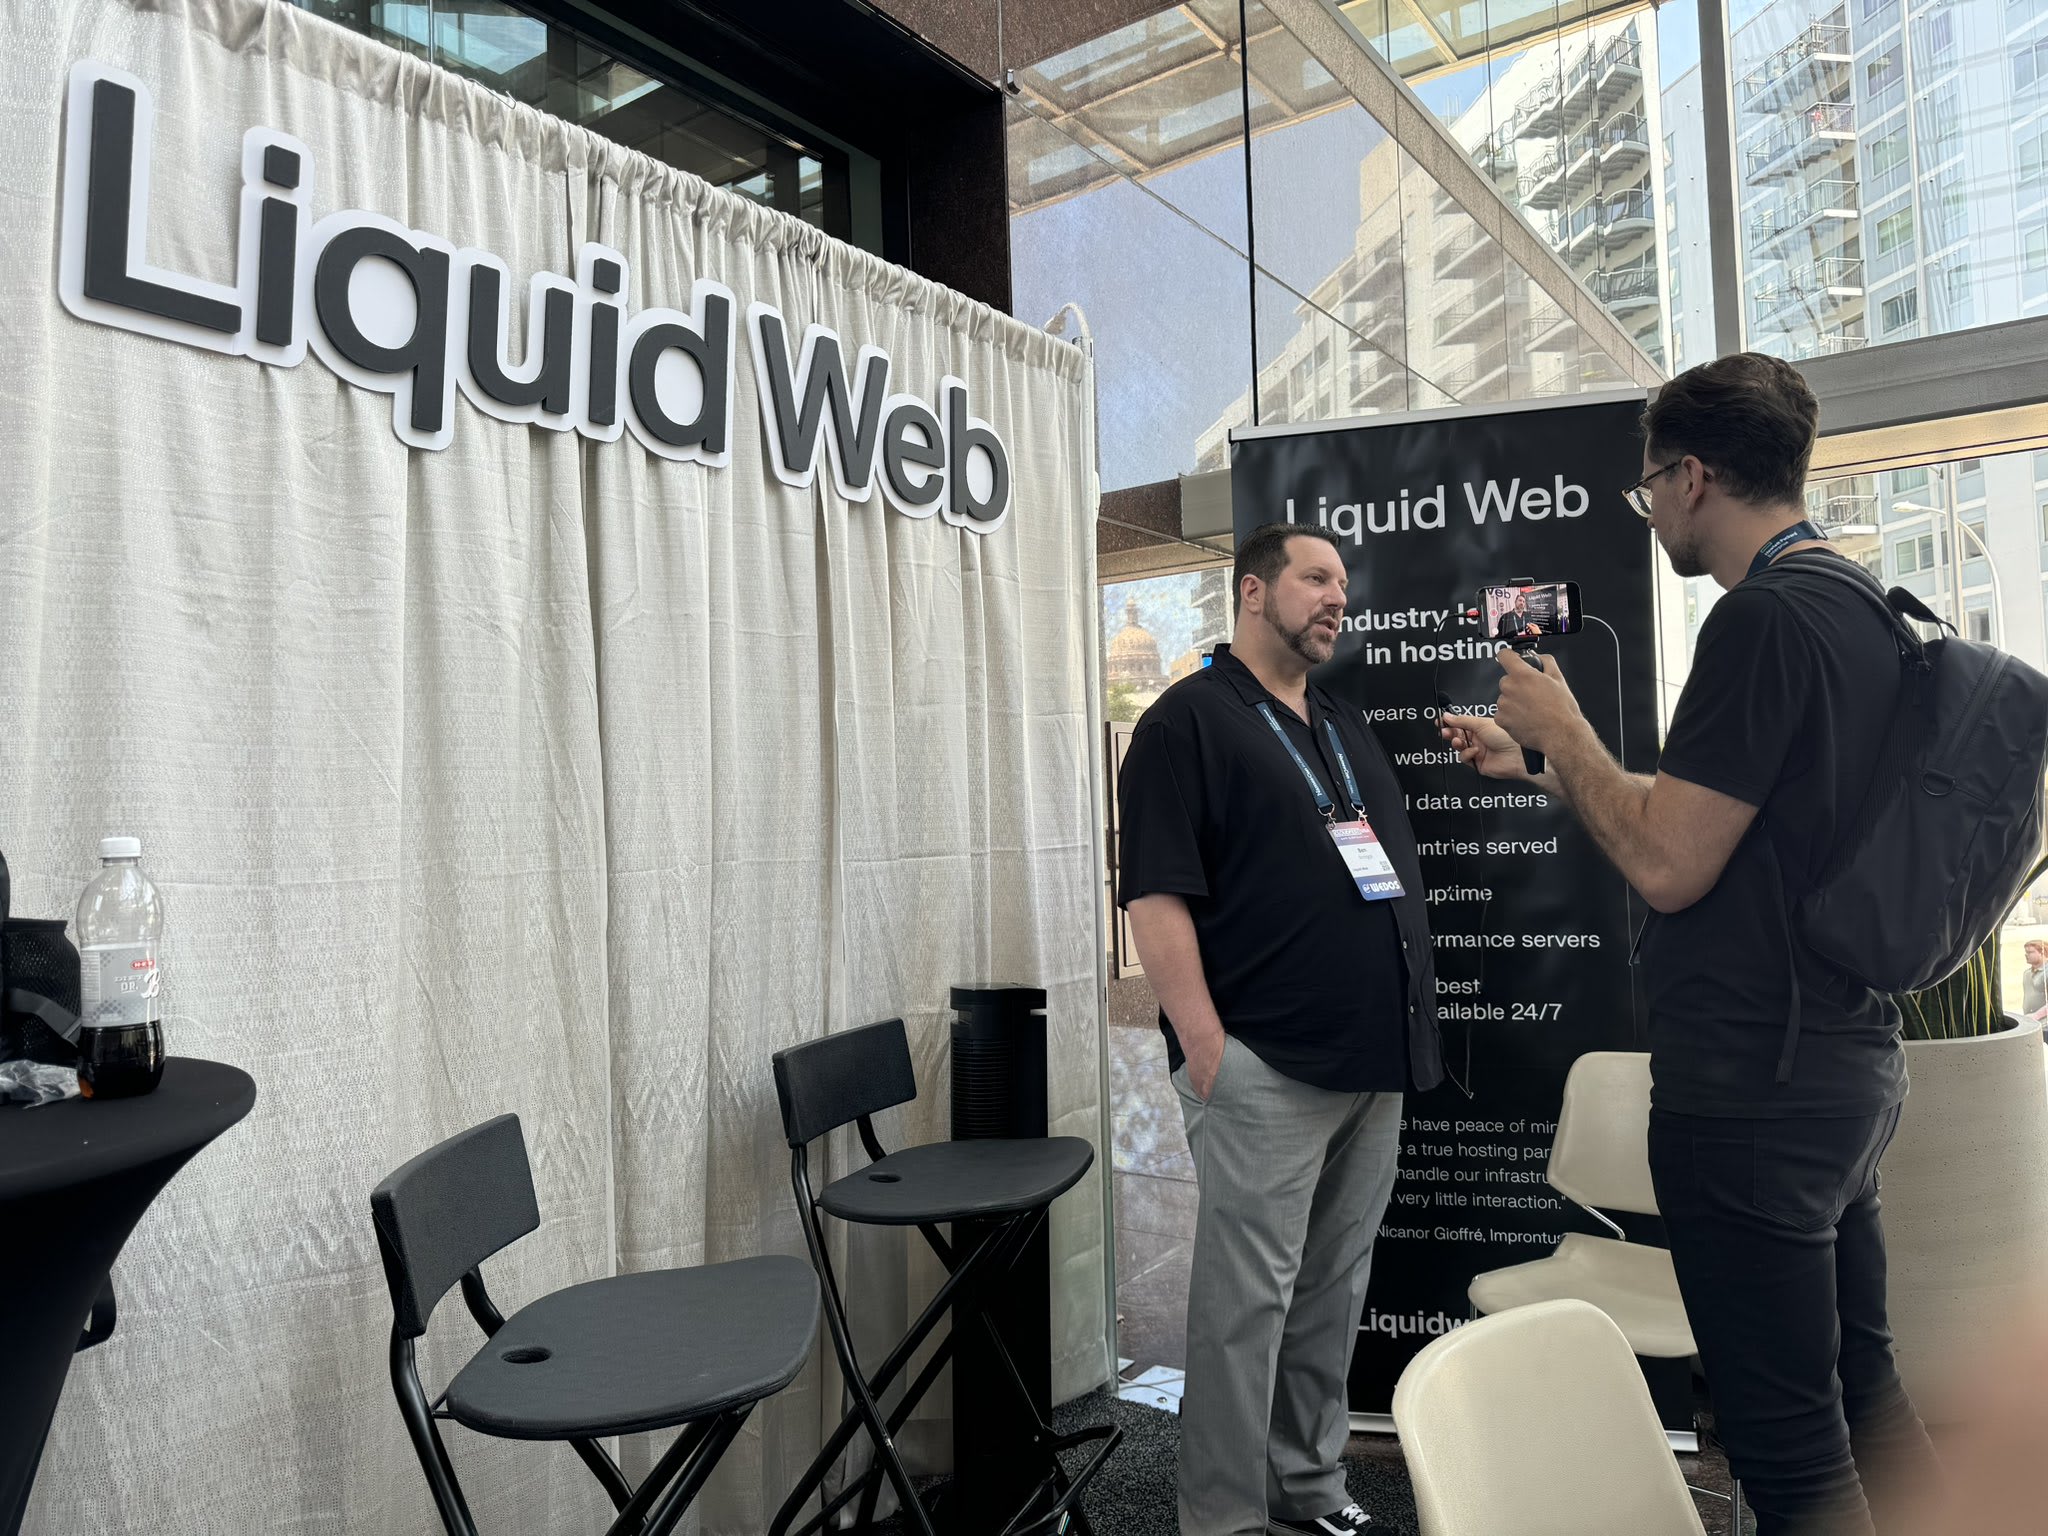 Ben Scroggs speaks with a visitor at the Liquid Web booth